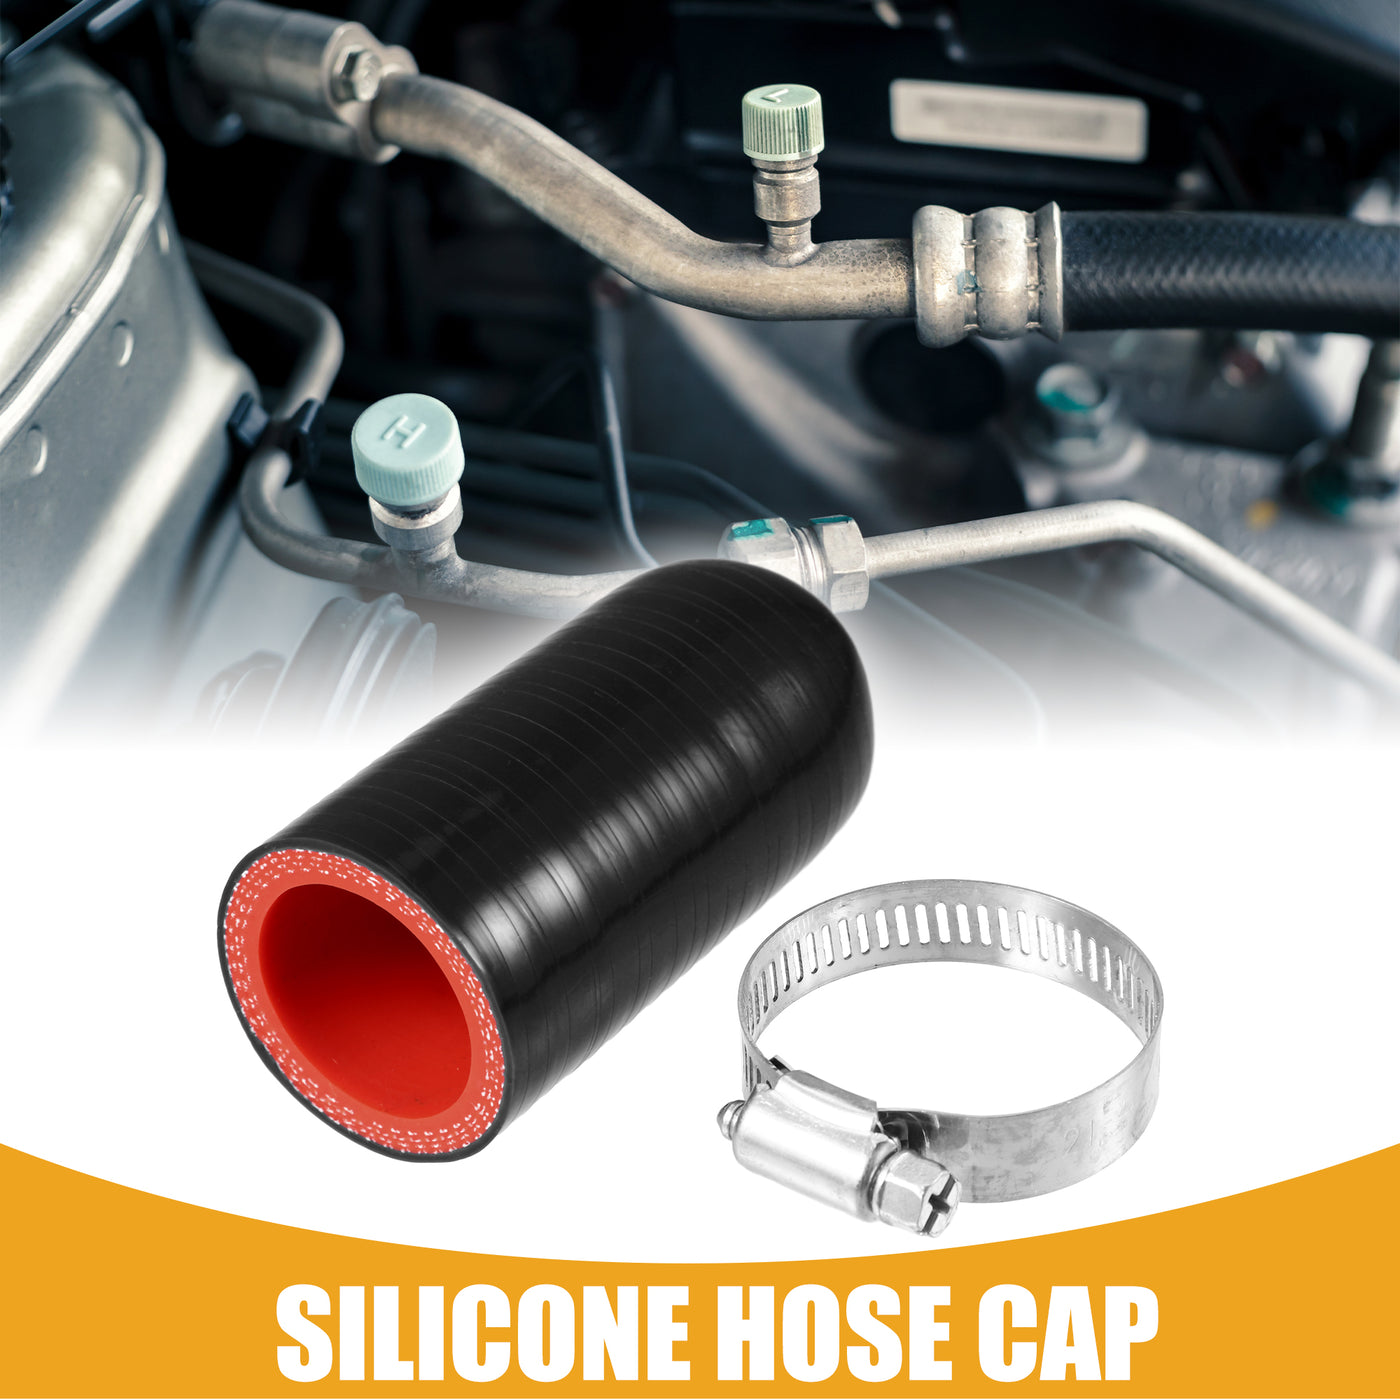 Partuto 1 Set 30mm 1.18" ID Universal Silicone Coolant Cap Intake Vacuum Hose End Plug - Car for Coolant Heater Bypass Vacuum Water Port - Silicone Black Red